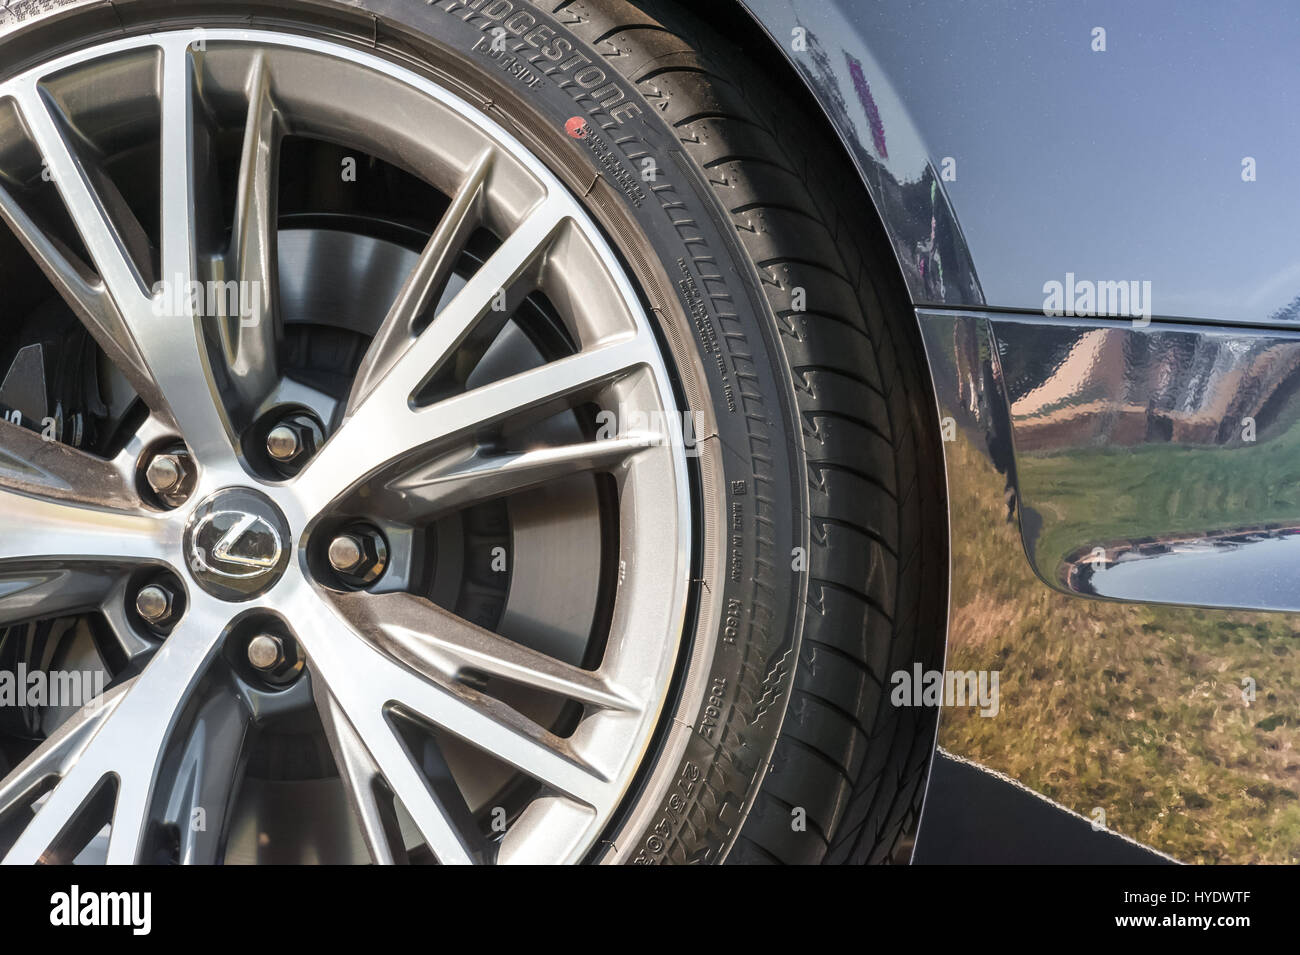 Laverstoke, Hampshire, UK - August 25, 2016: Closeup of a luxury Lexus automobile wheel and tire with sky and grassland reflections in the background Stock Photo